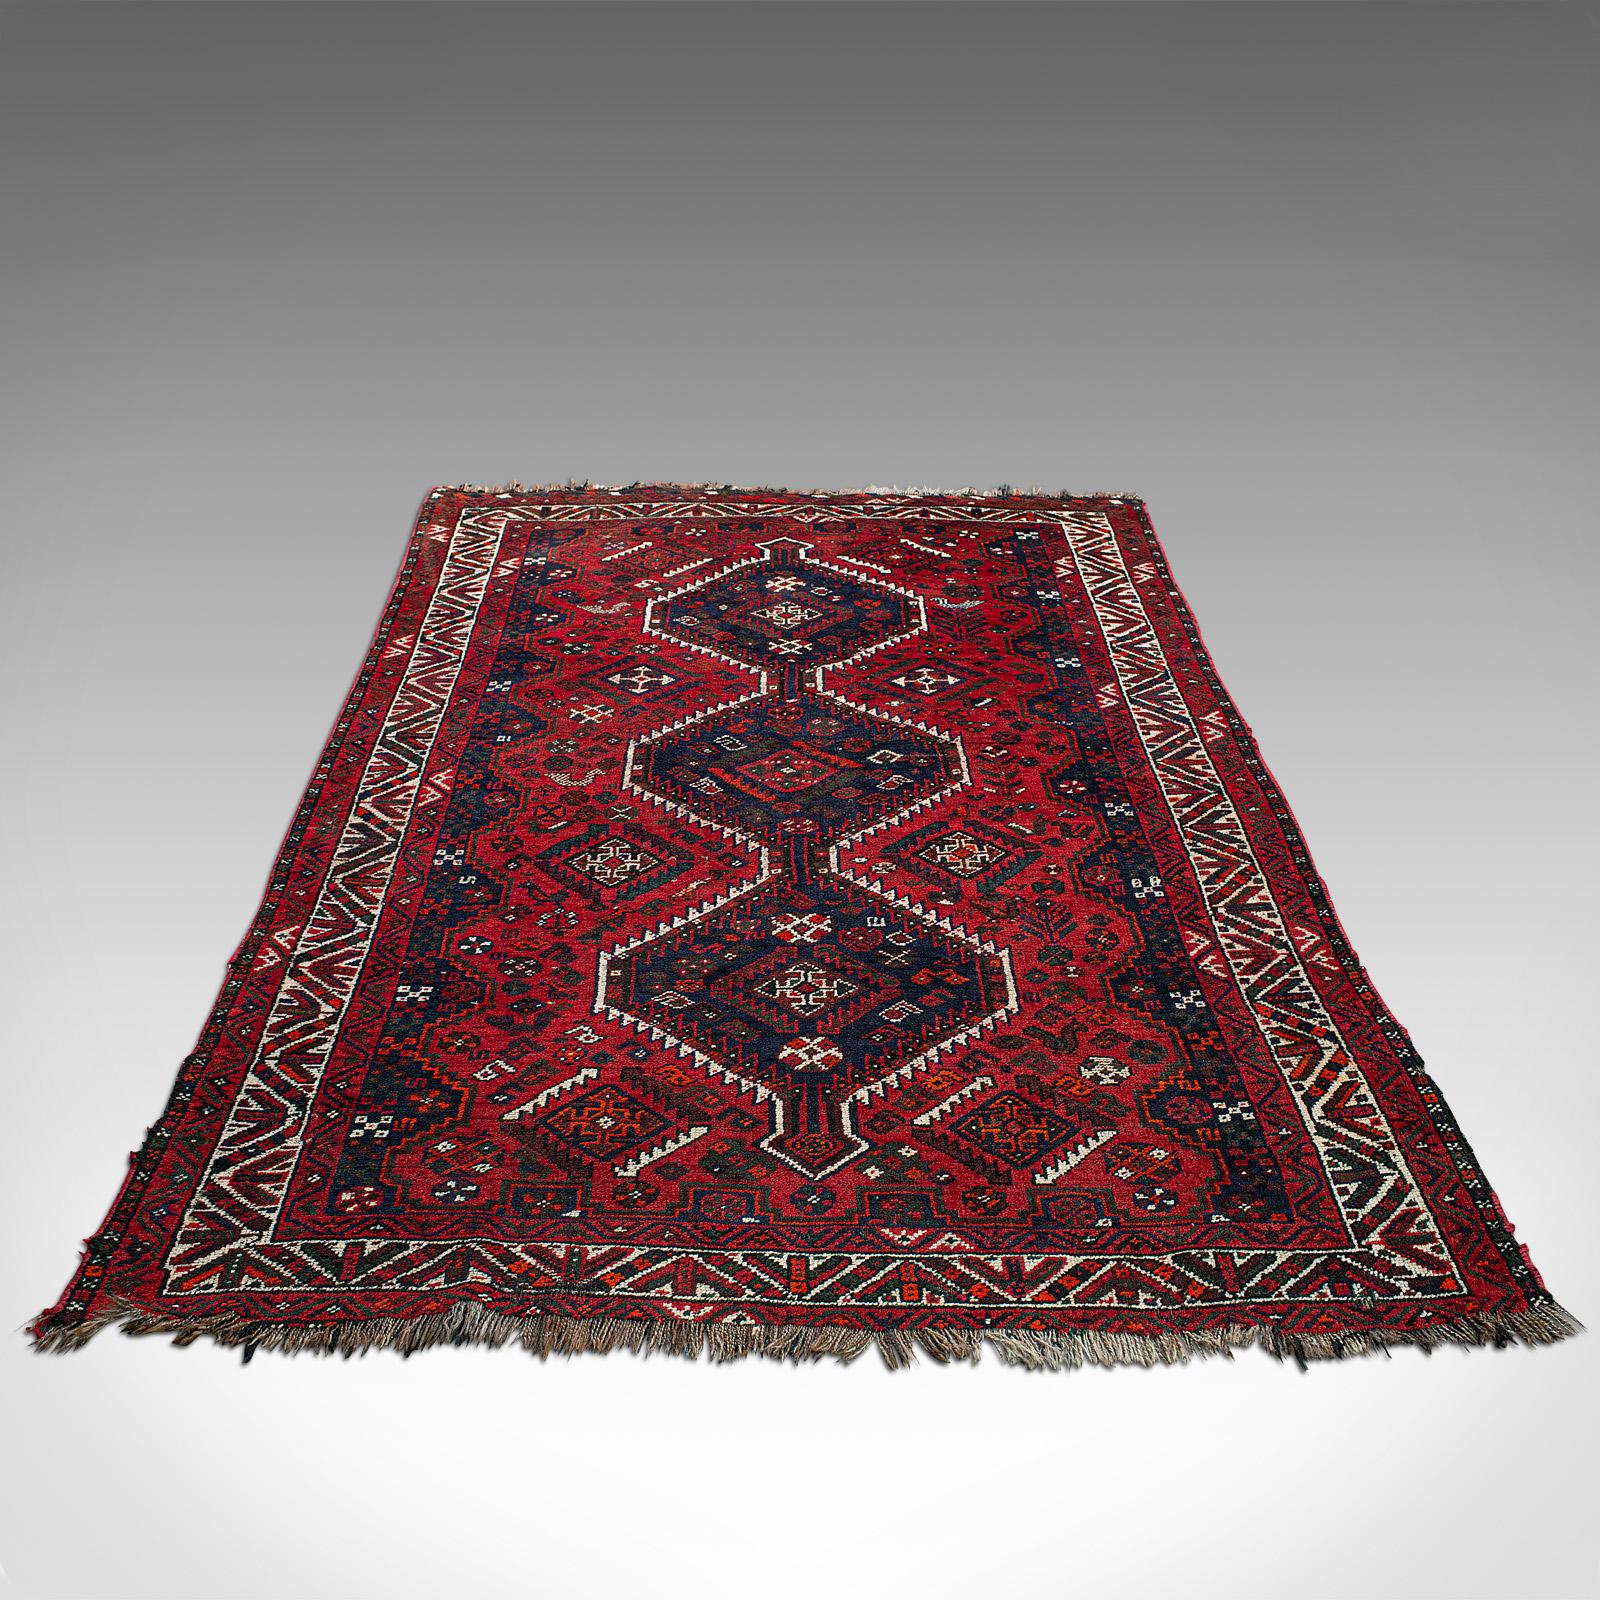 This is an antique Turkoman carpet. A Caucasian, hand woven lounge or hallway rug, dating to the late 19th century, circa 1900.

Of close to Qali size at 172cm x 257cm (67.75